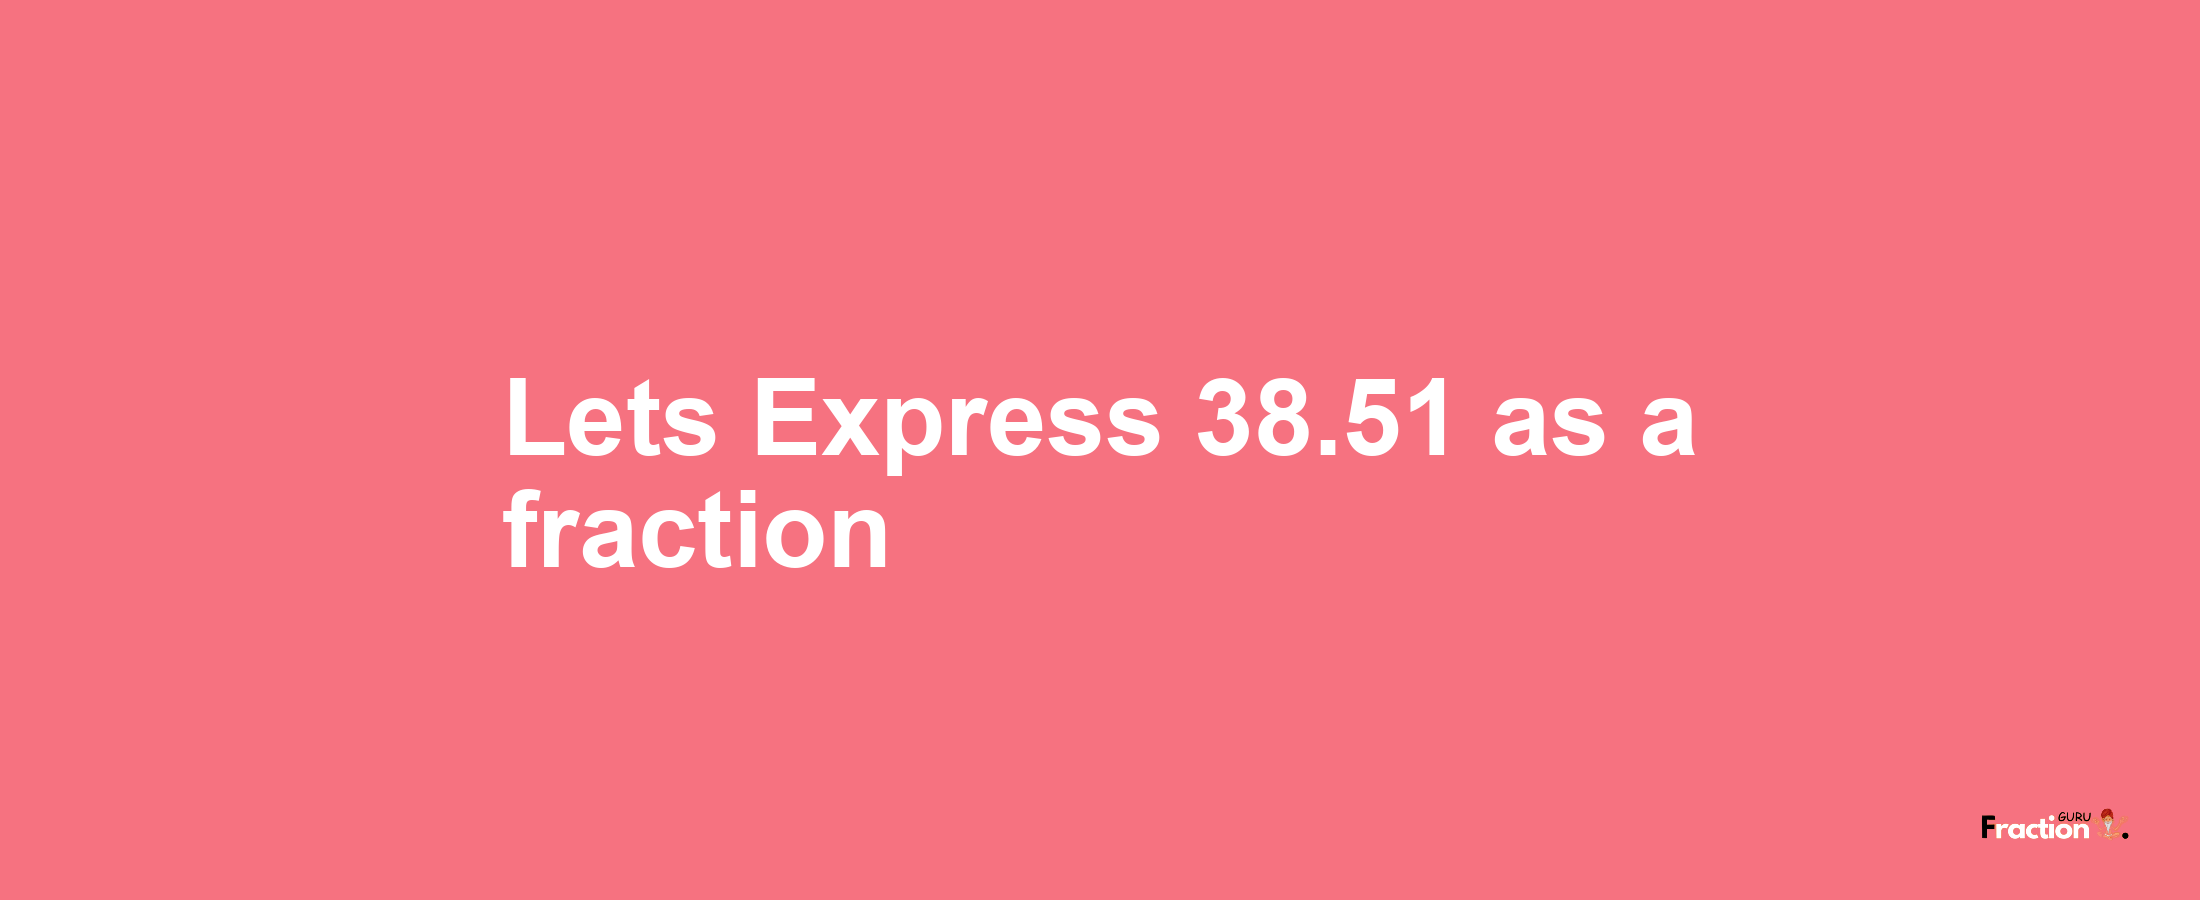 Lets Express 38.51 as afraction